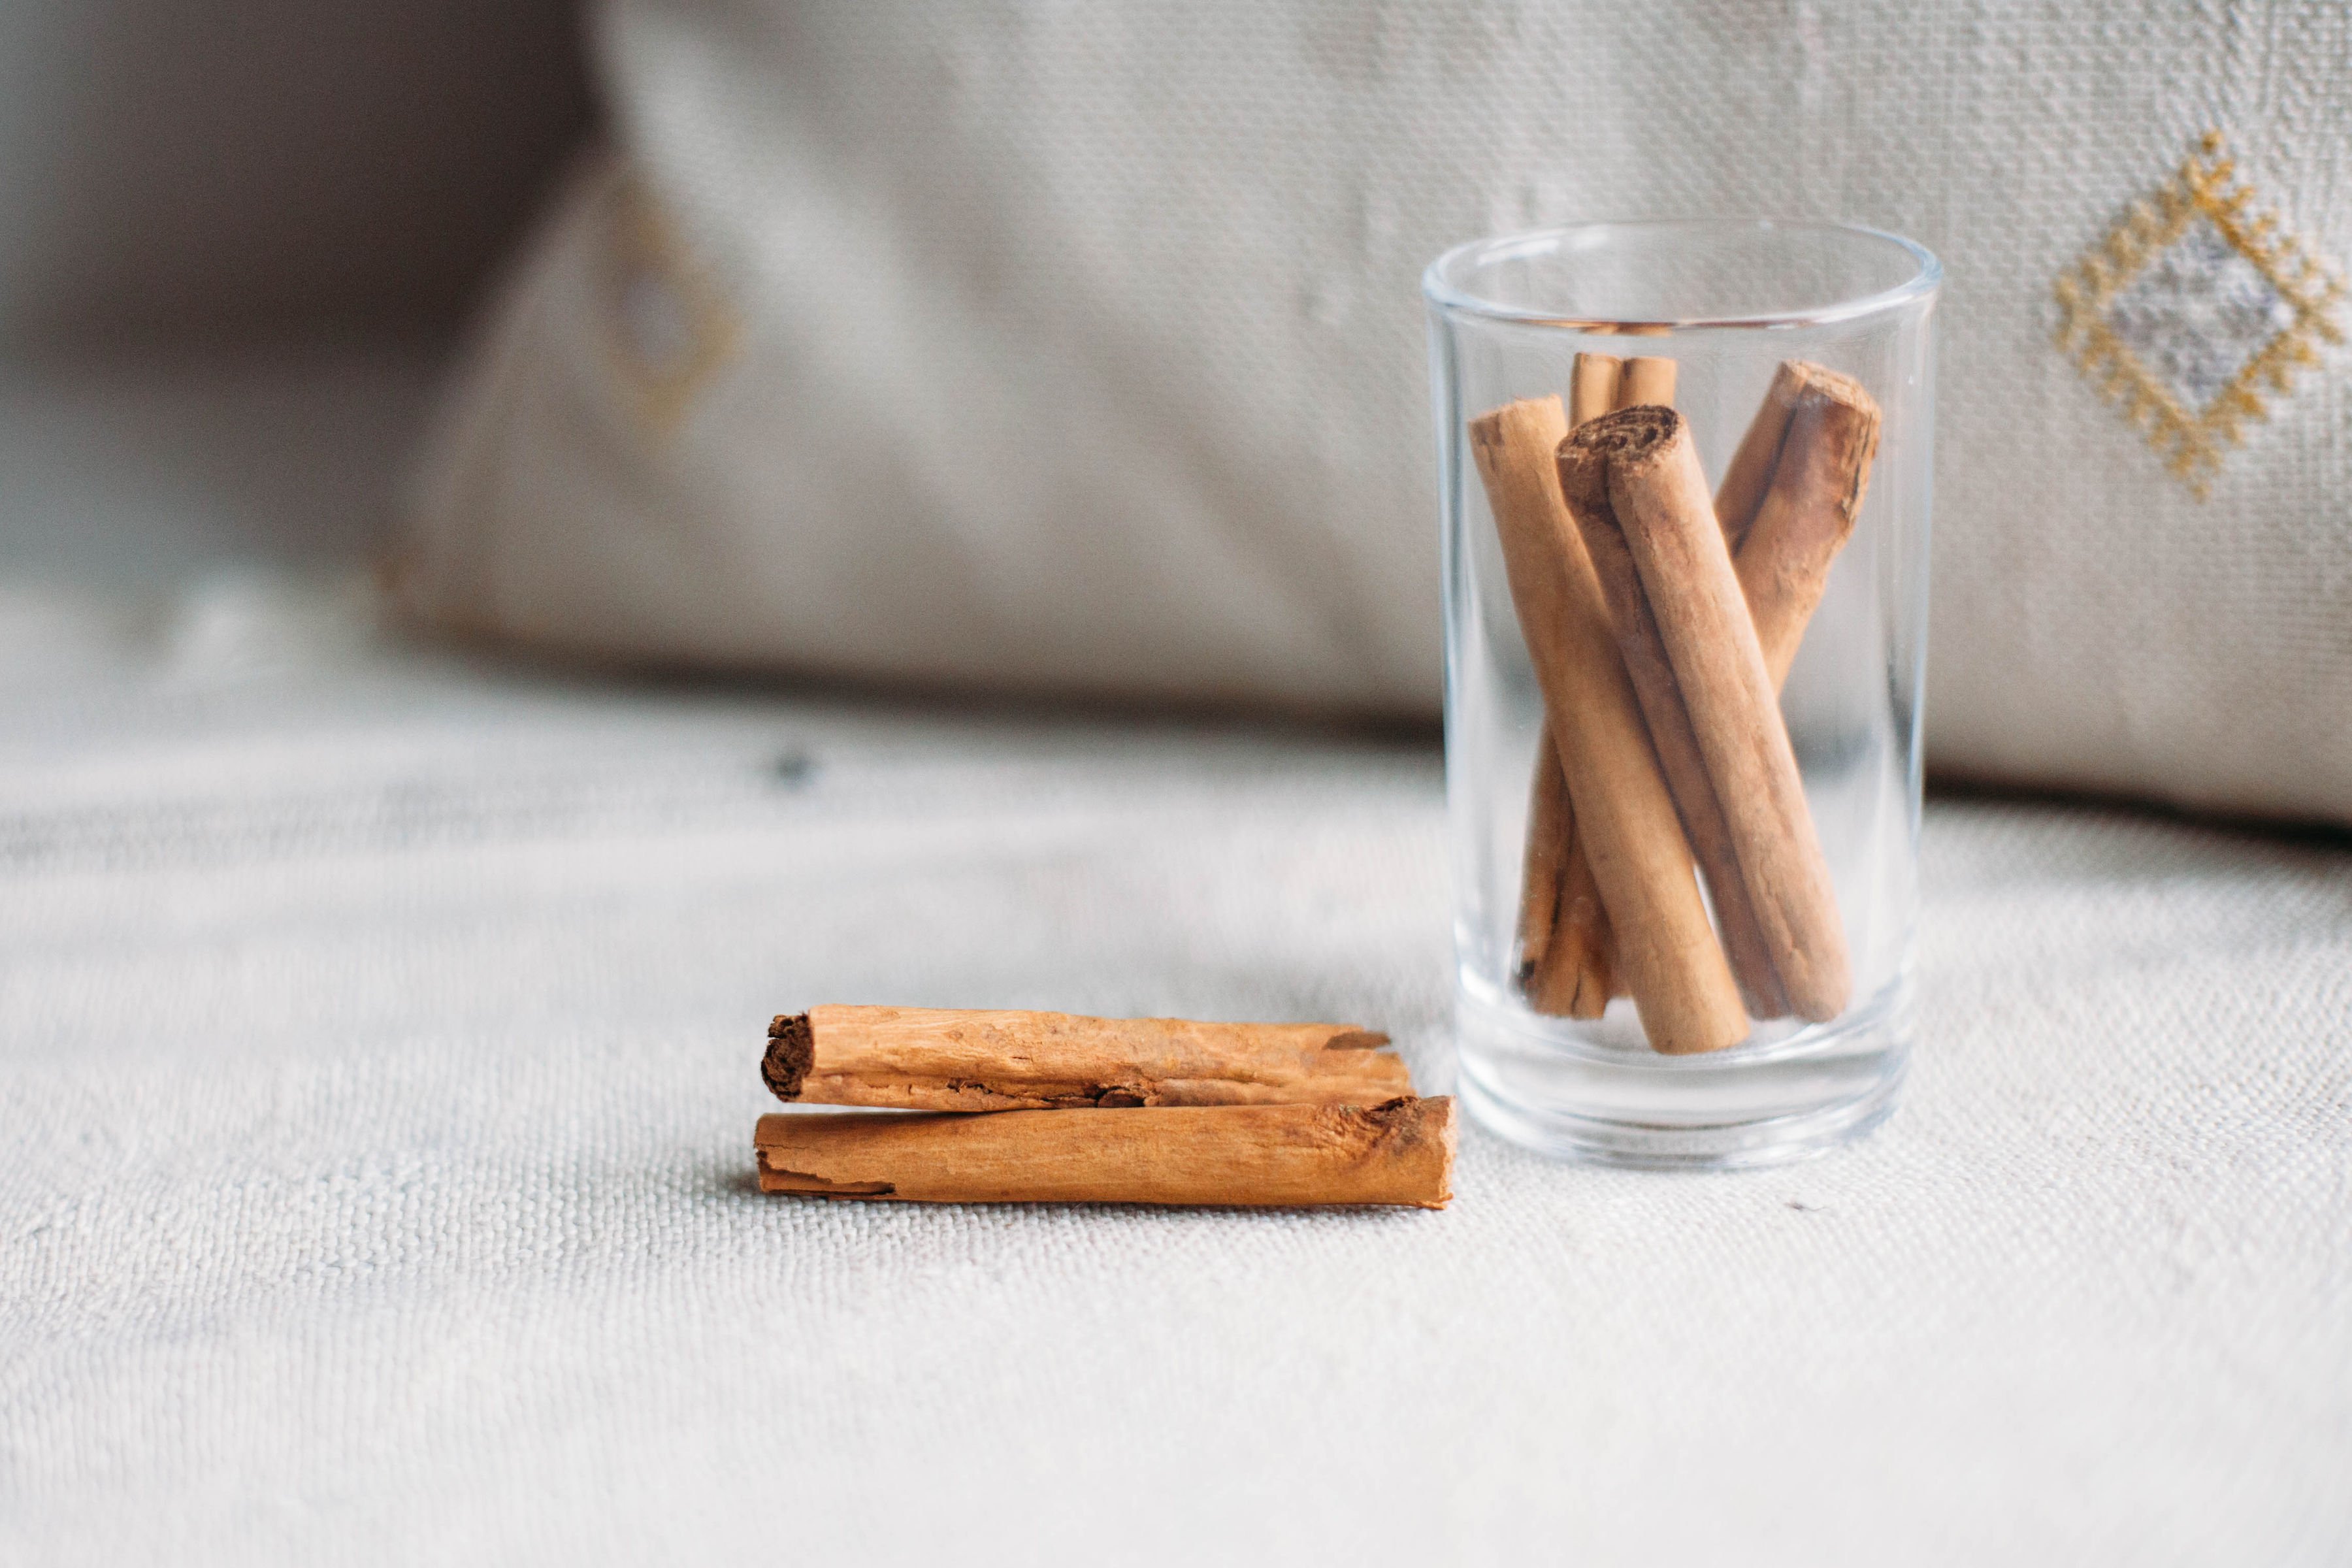 cinnamon sticks laying on a cloth and in a clear glass